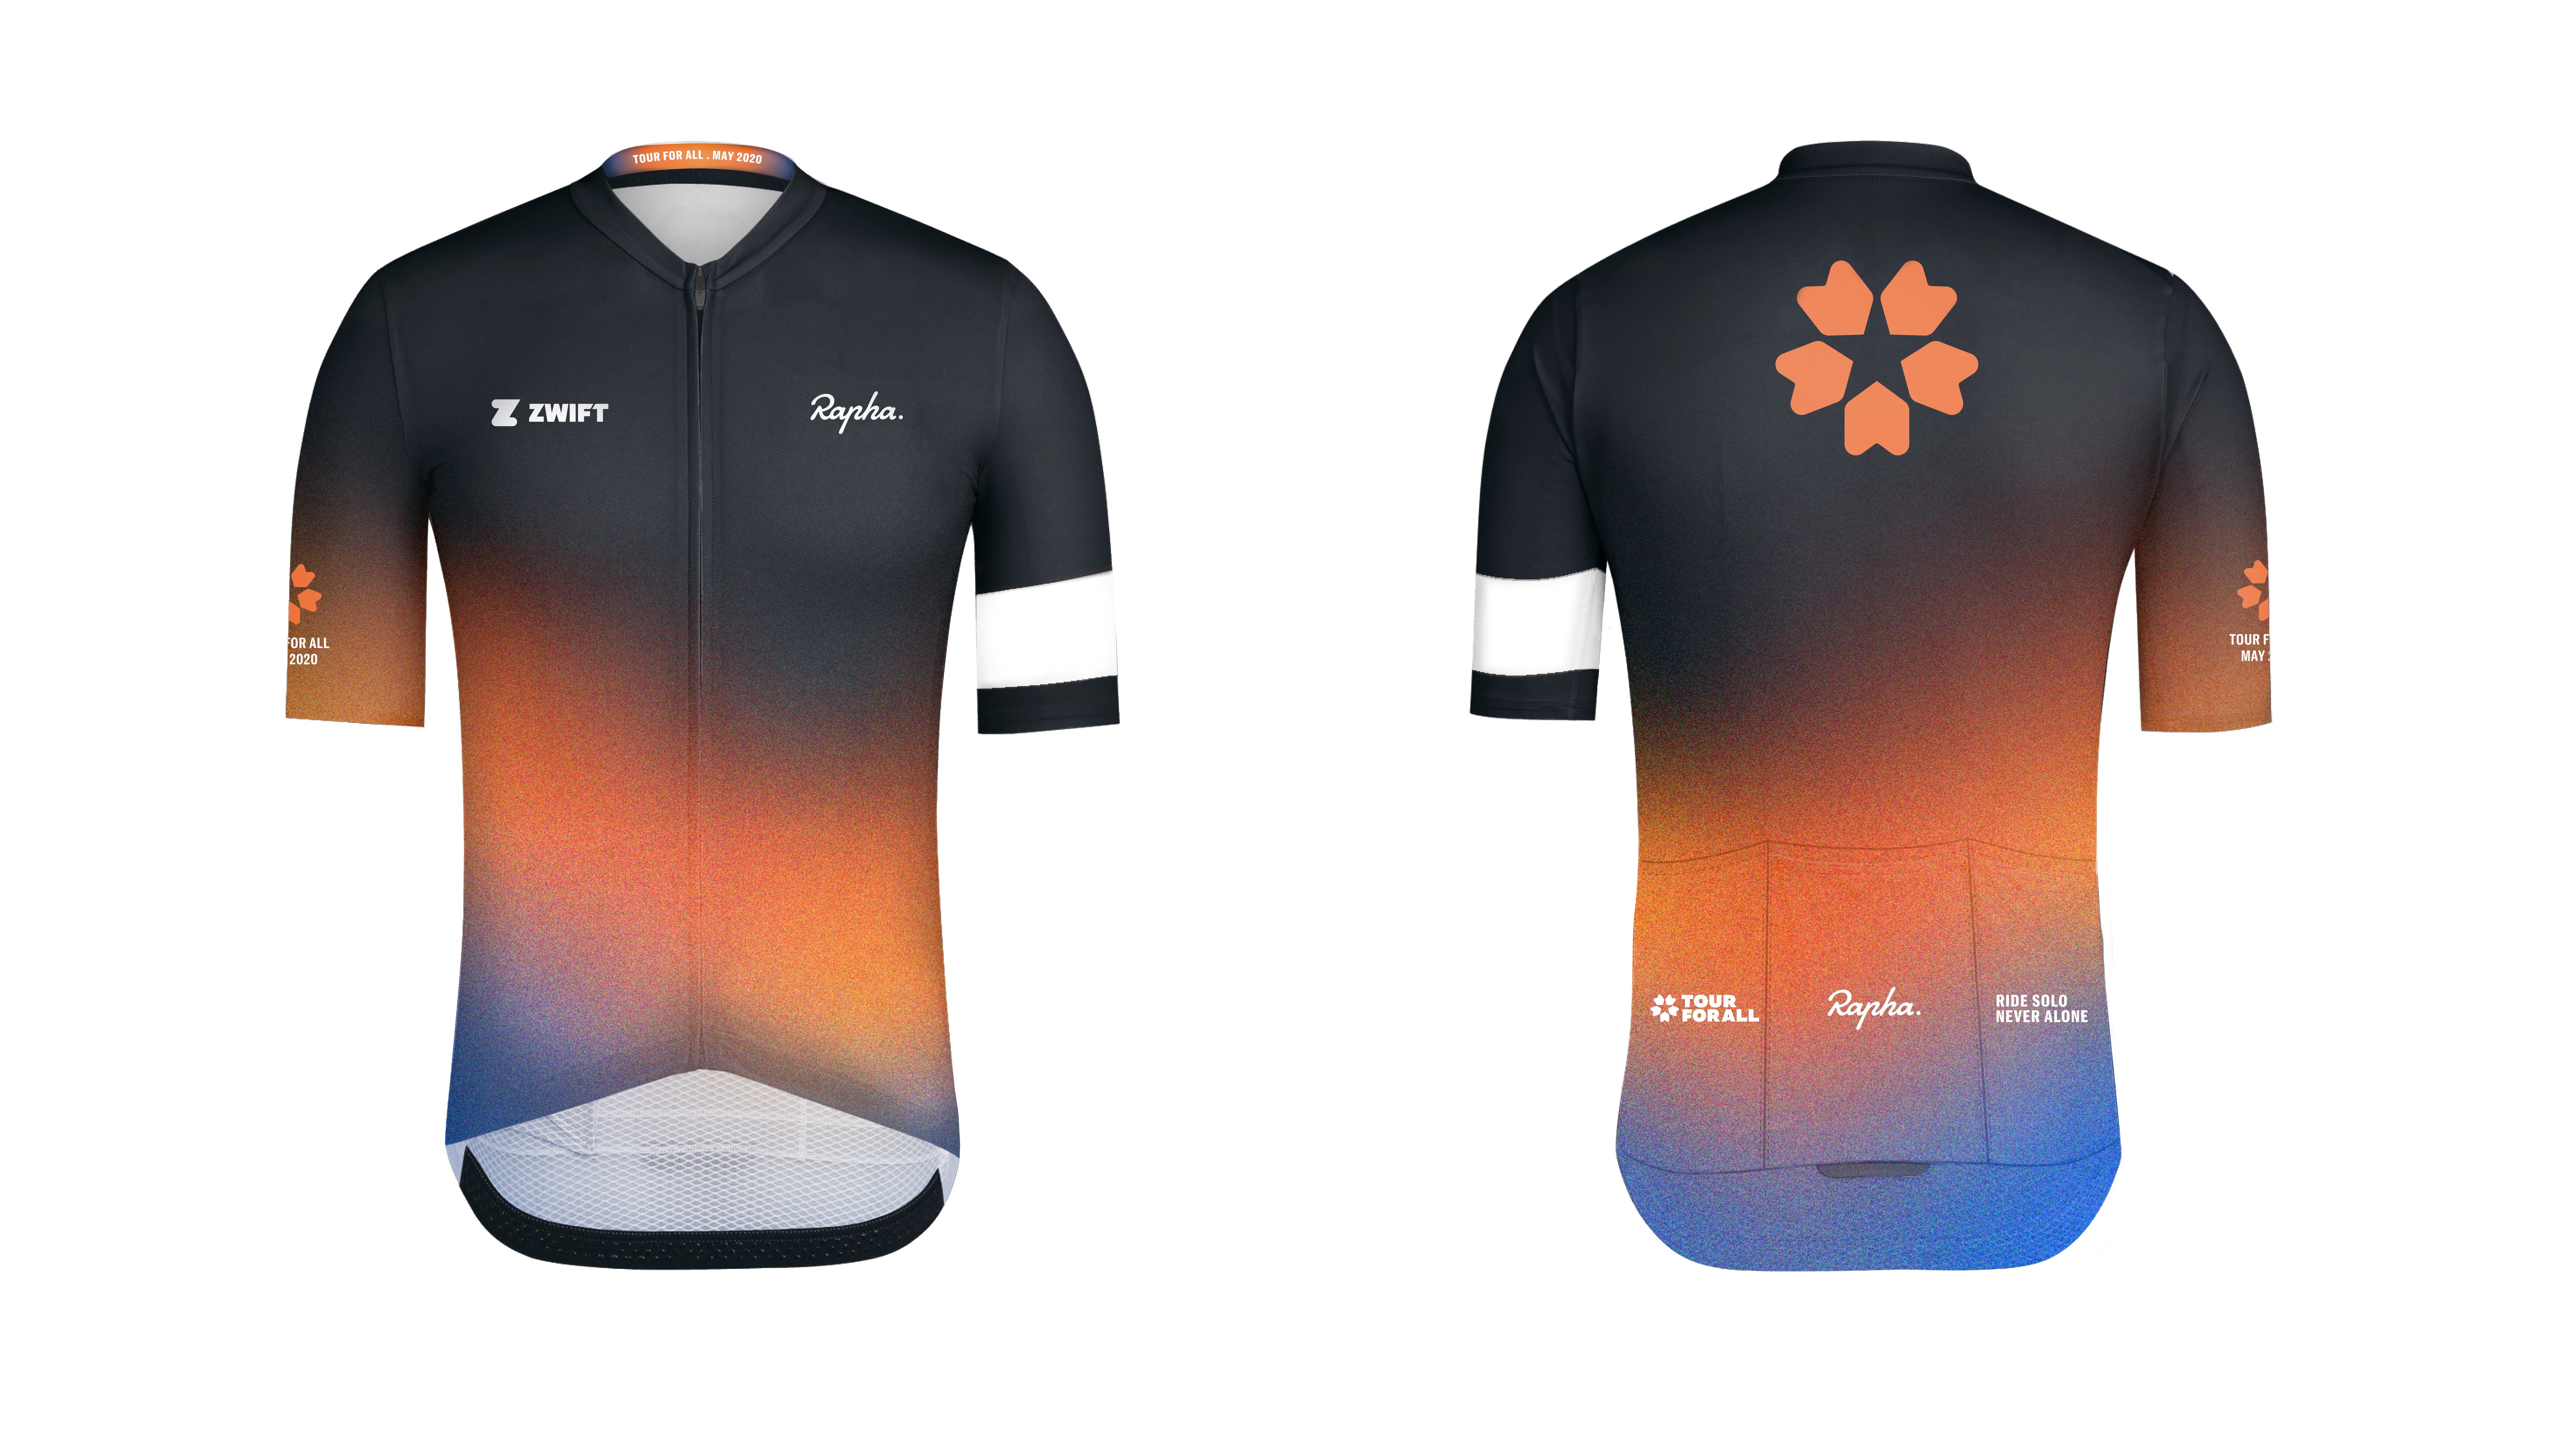 Rapha Tour For All gear | Cyclingnews